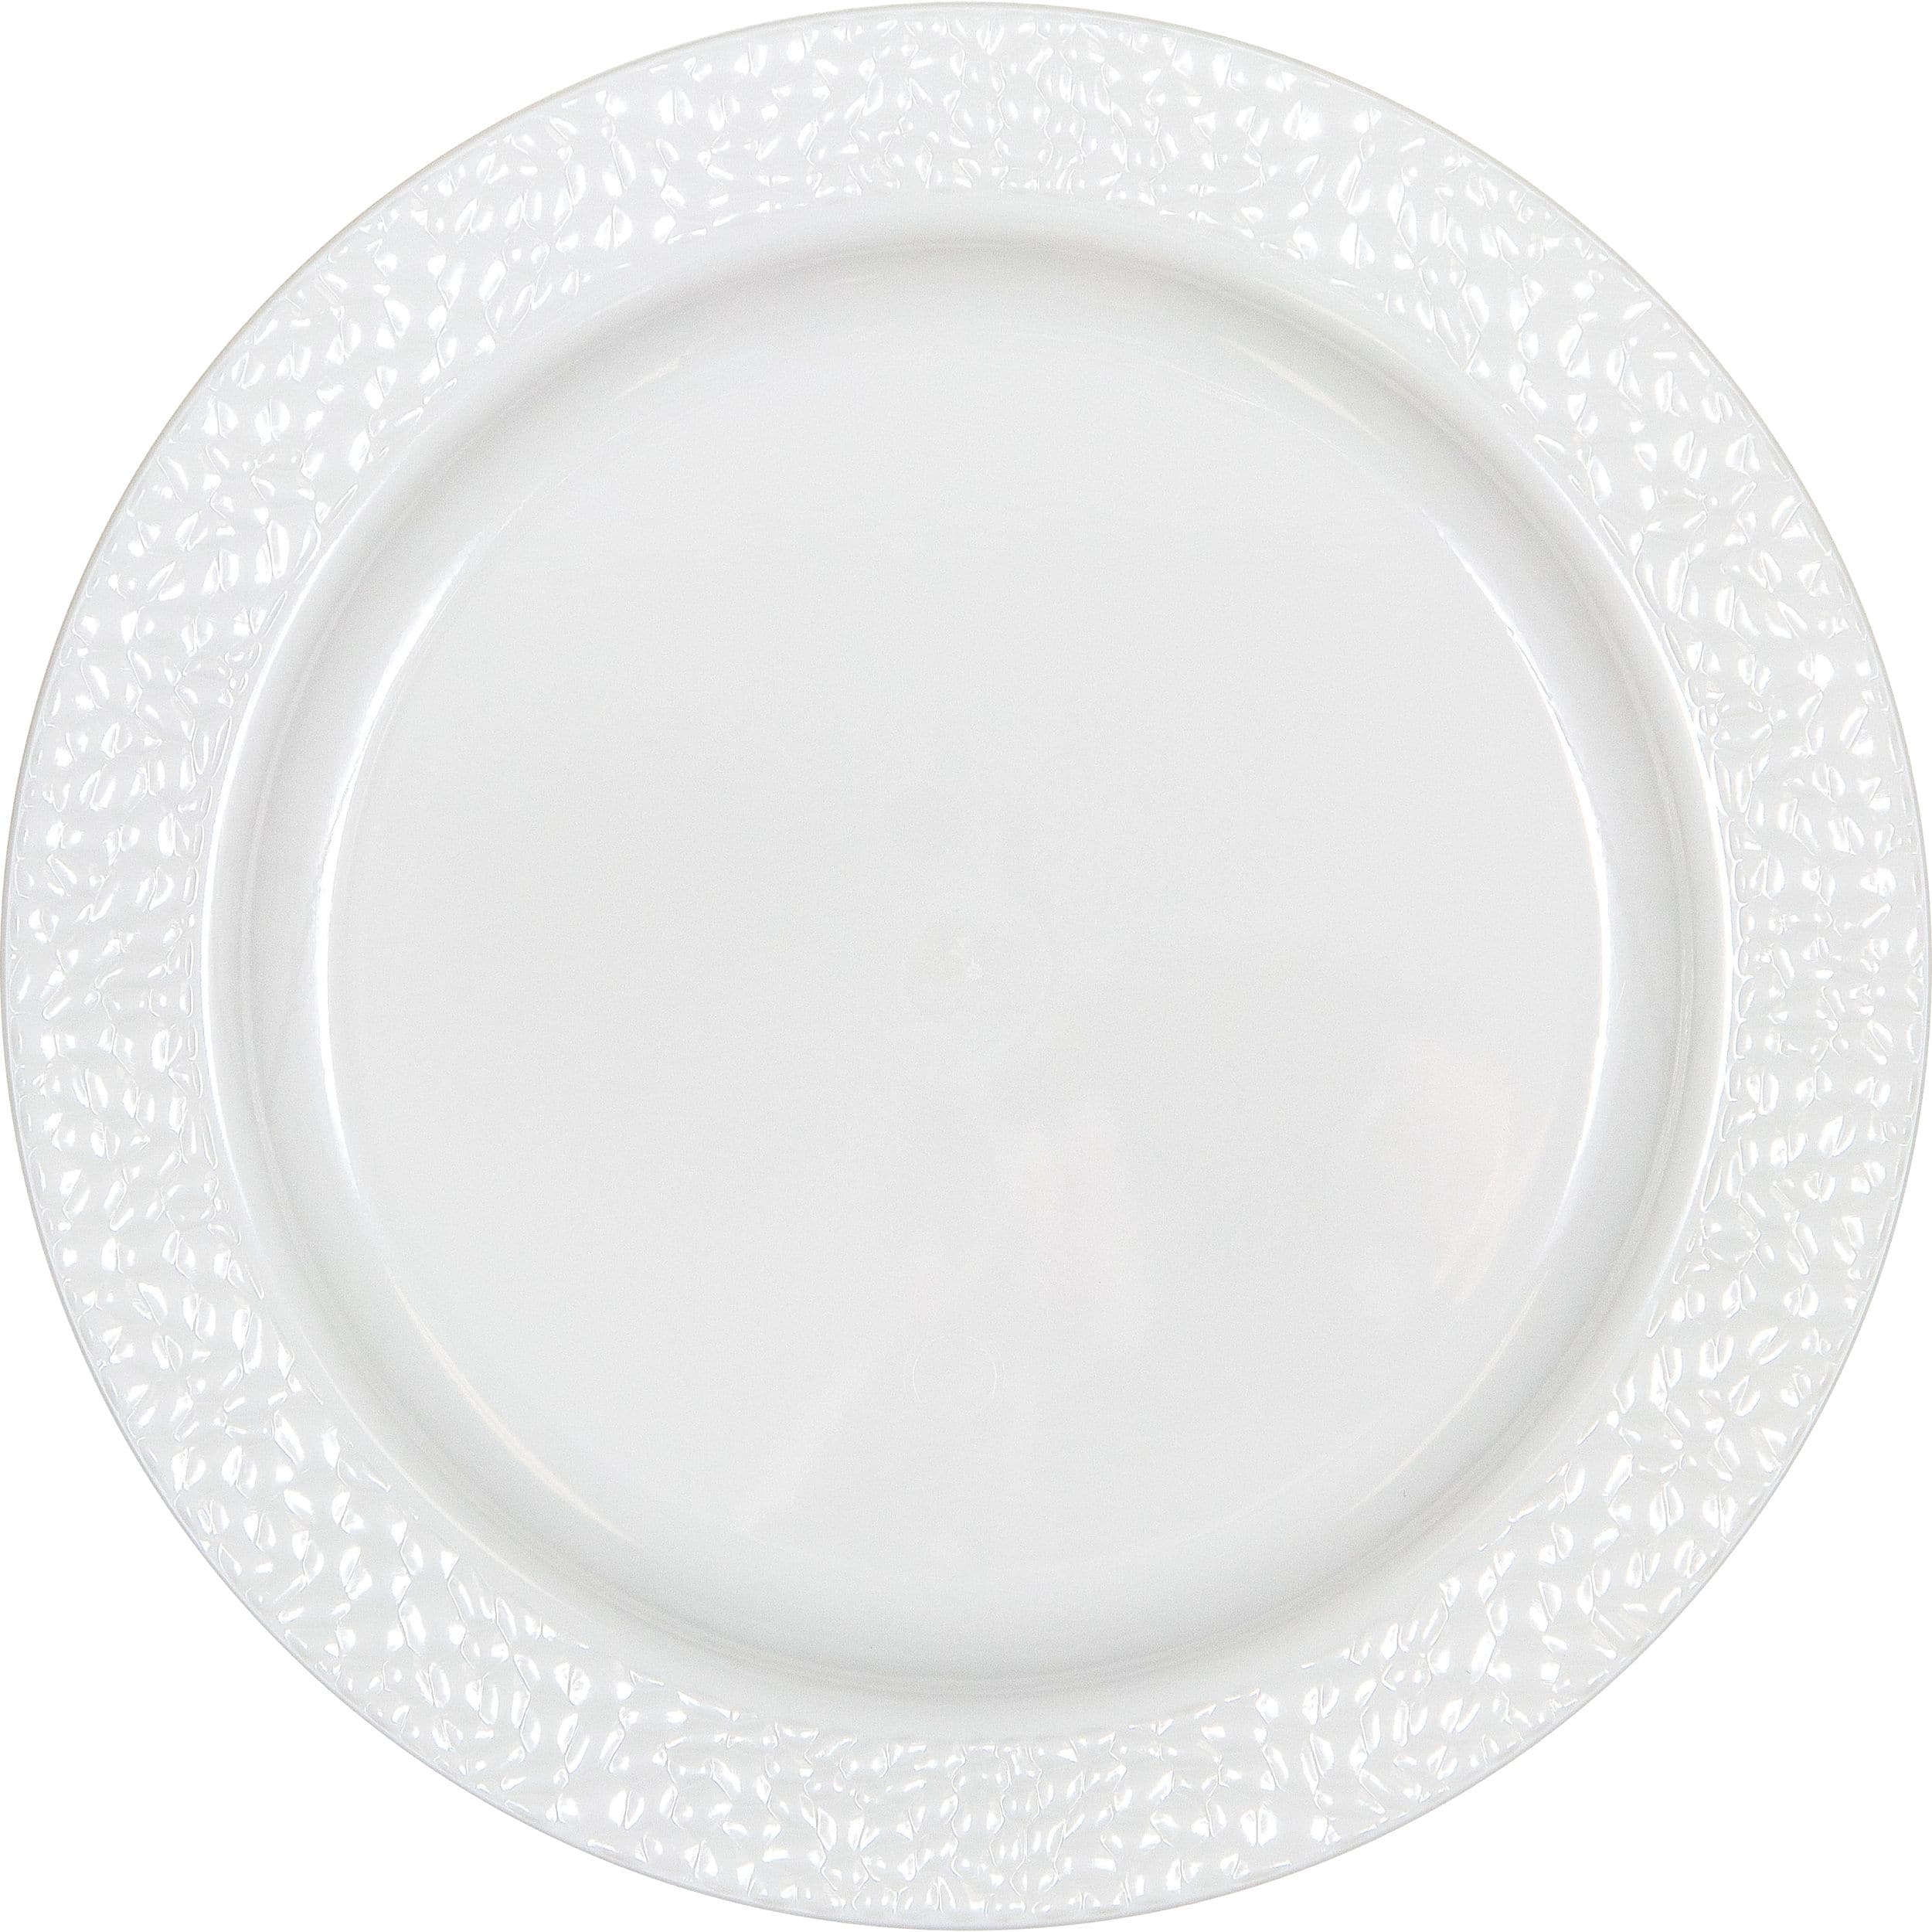 Royal Chinet - Luncheon plates, pk. of 40. Colour: white